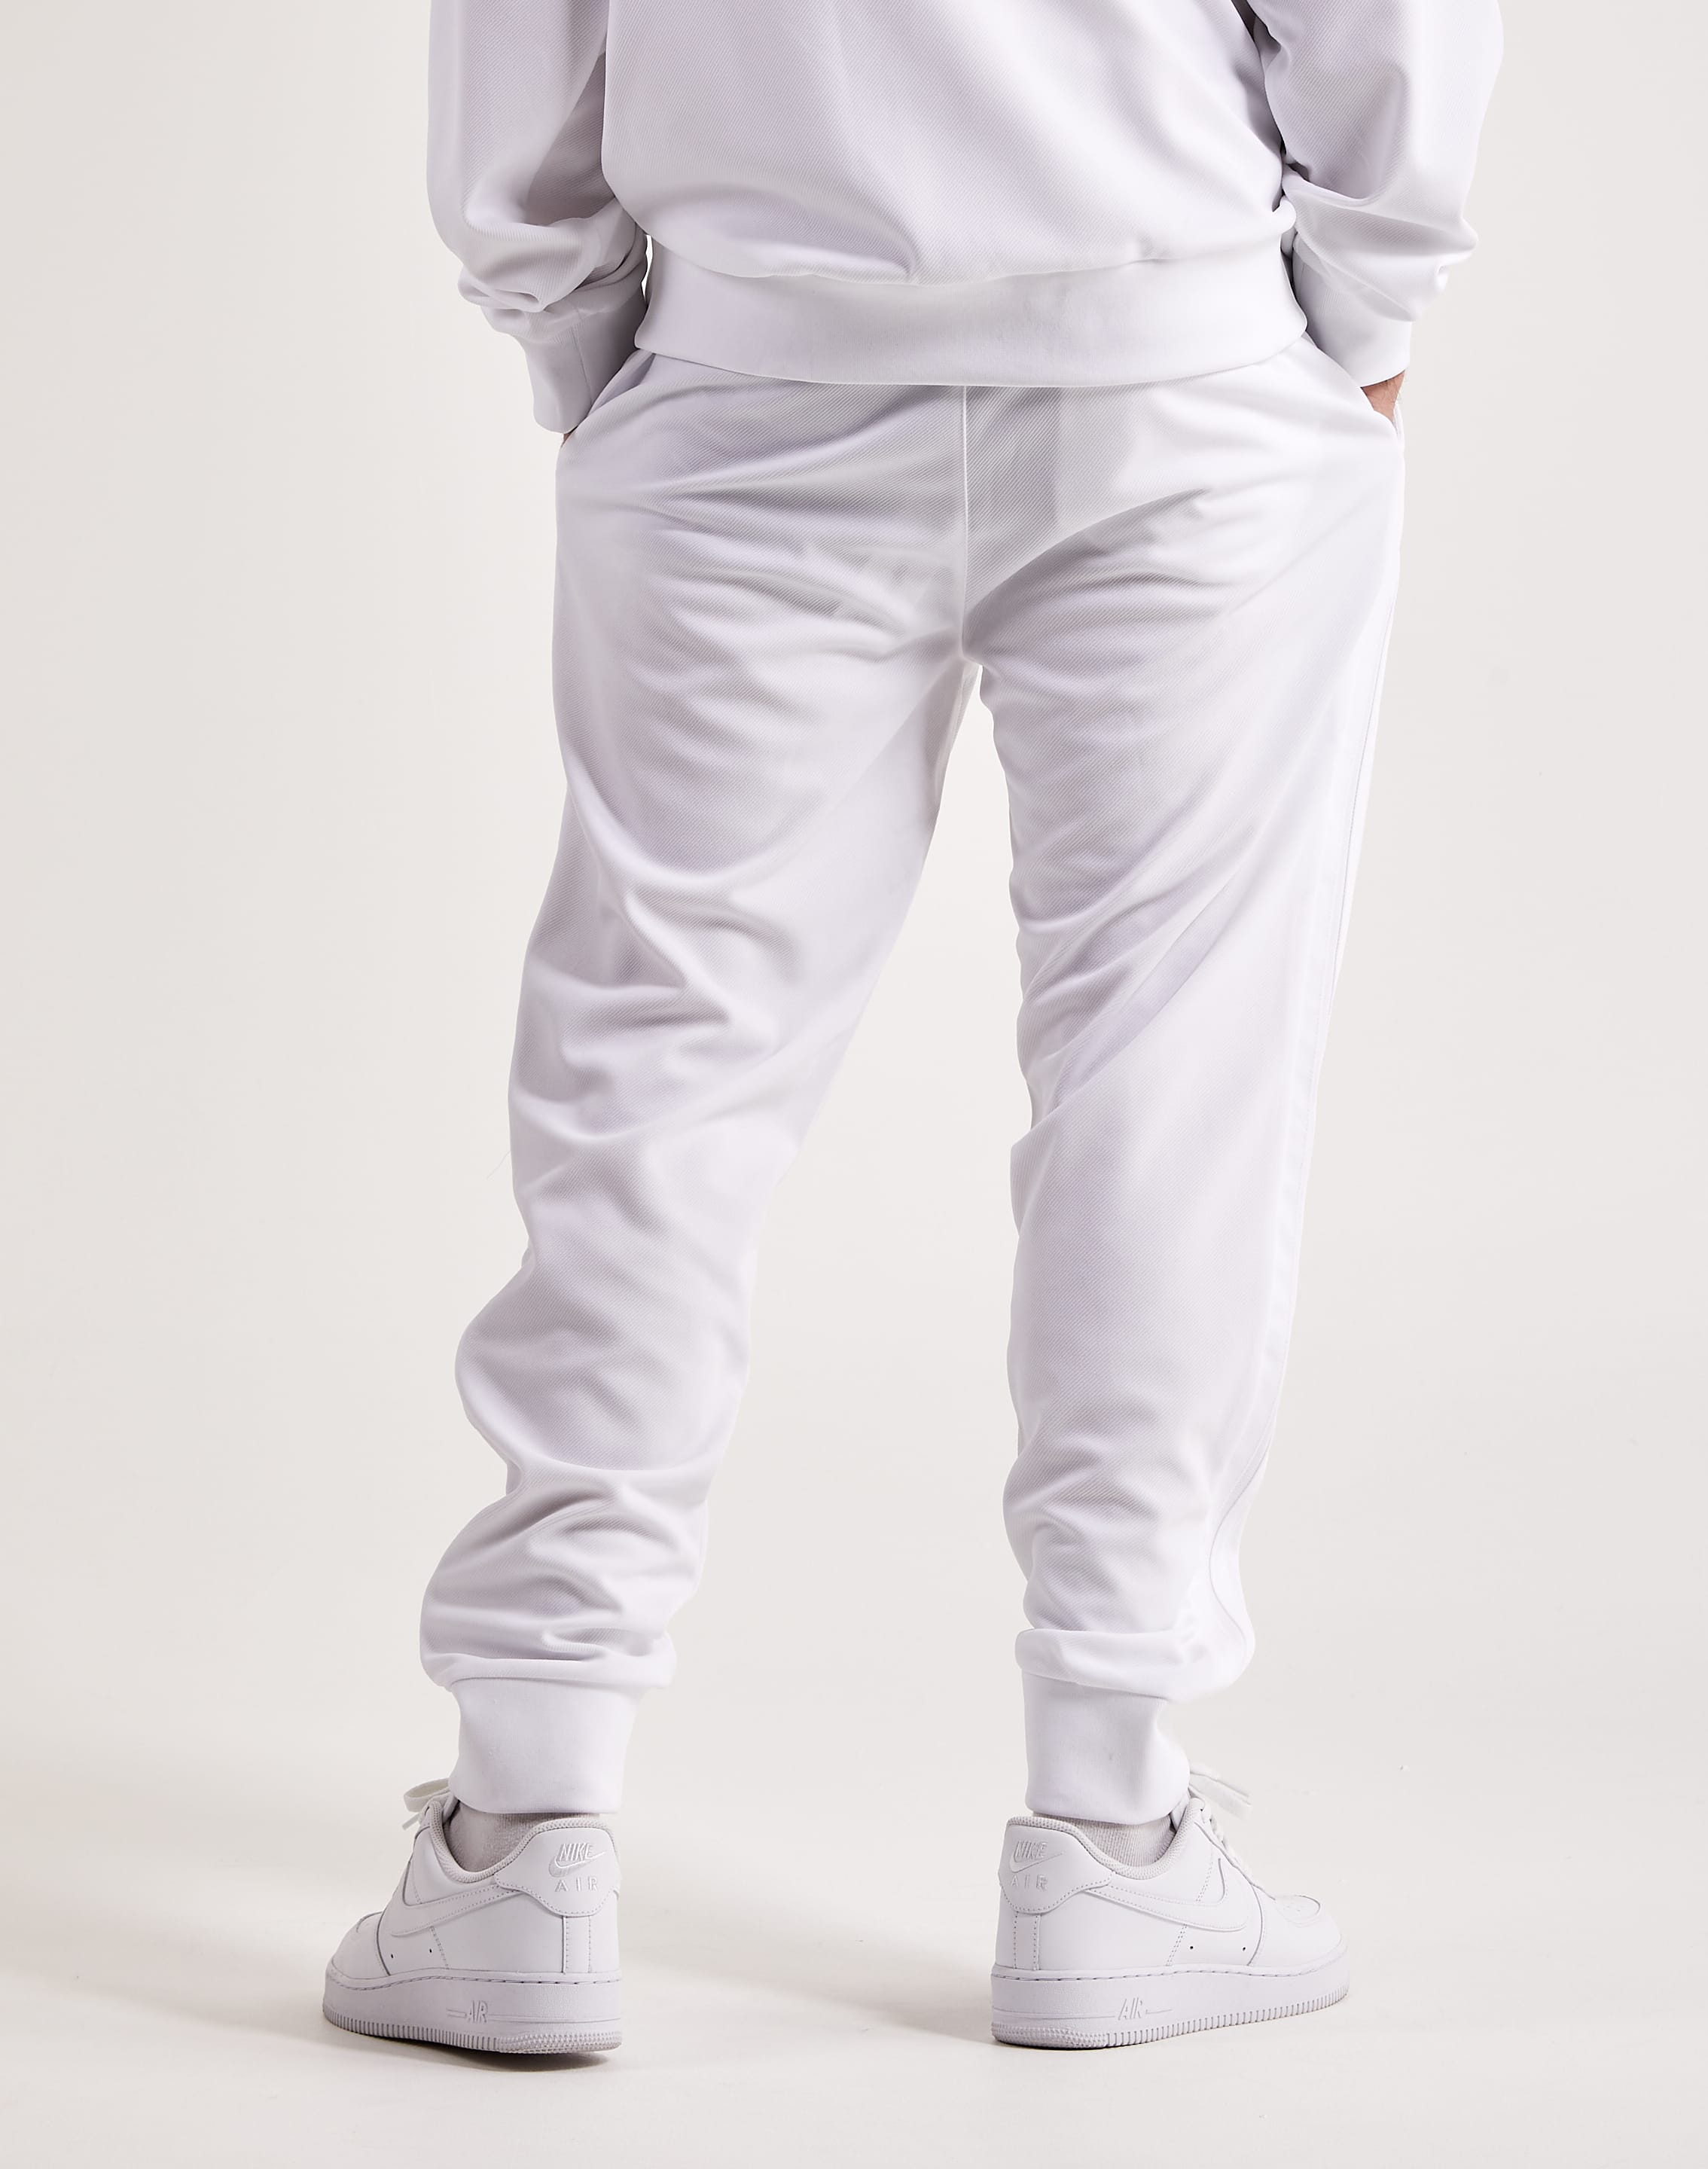 Sergio Tacchini Griante Track Pants – DTLR